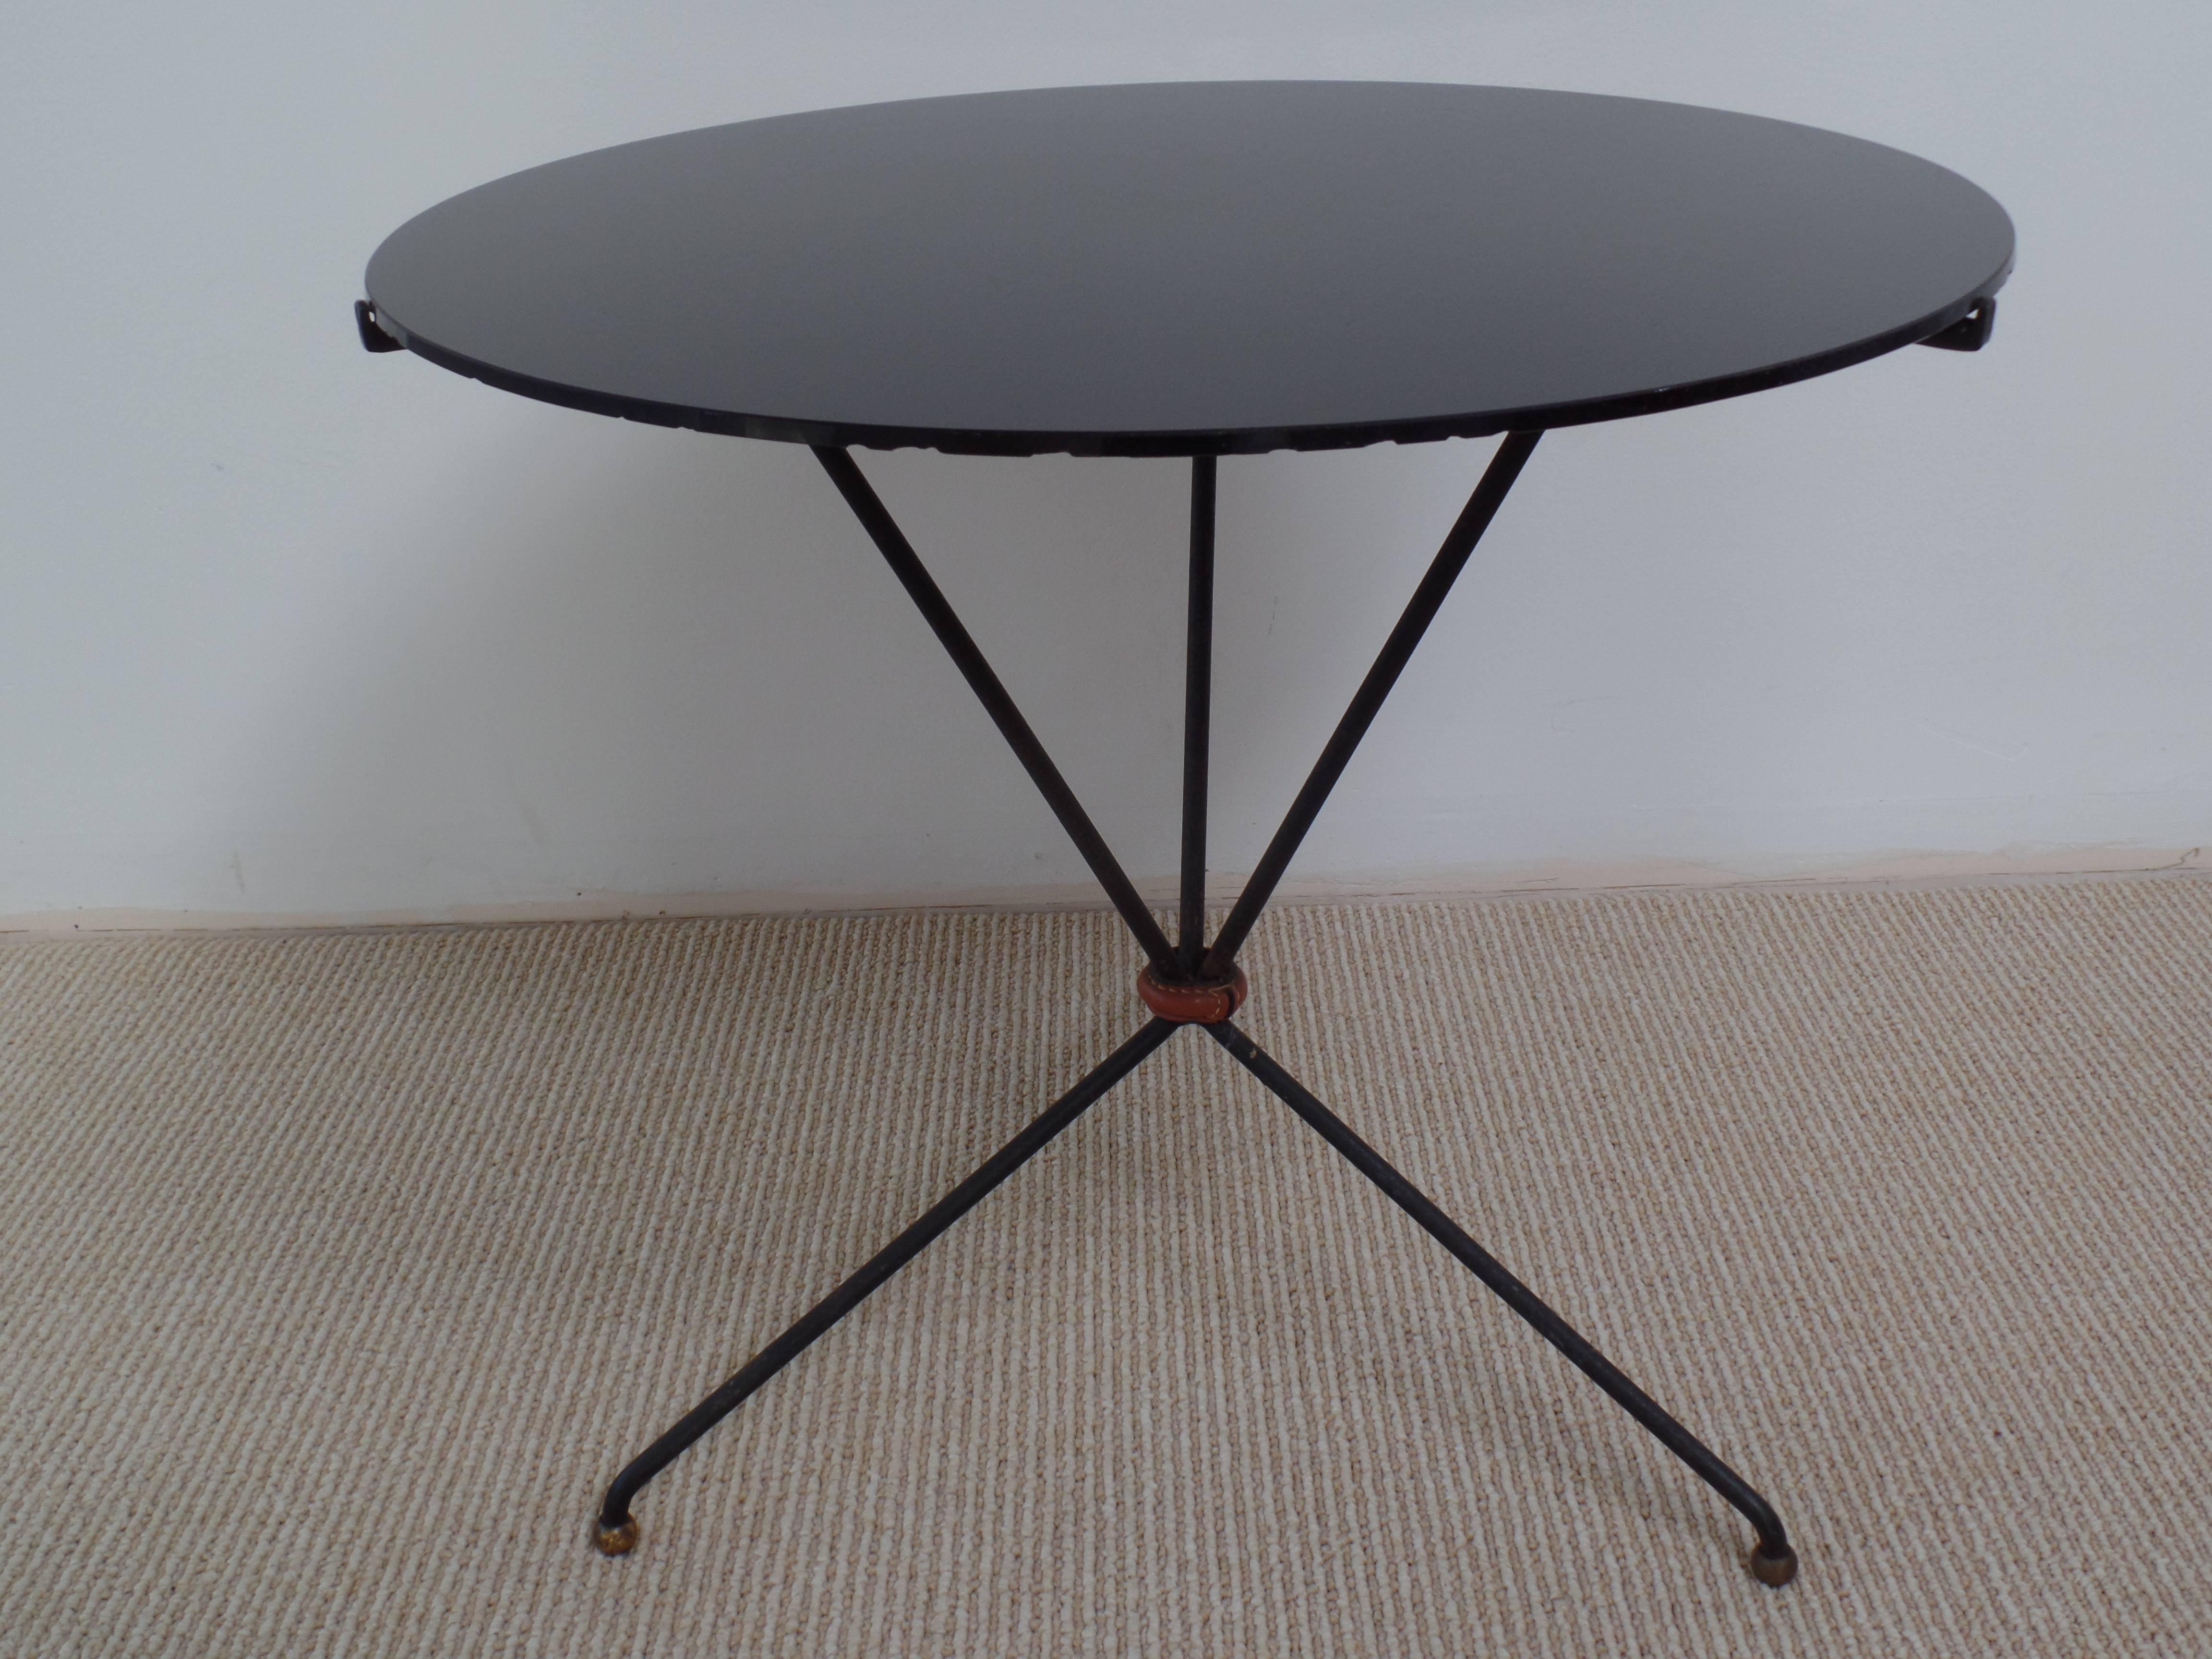 Elegant pair of end tables or Gueridons in the style of Jacques Adnet.

The tables are composed of wrought iron bases sitting on tripod legs ending in brass ball feet. The tabletop of black onyx glass rests on a tri-form supports with arched iron